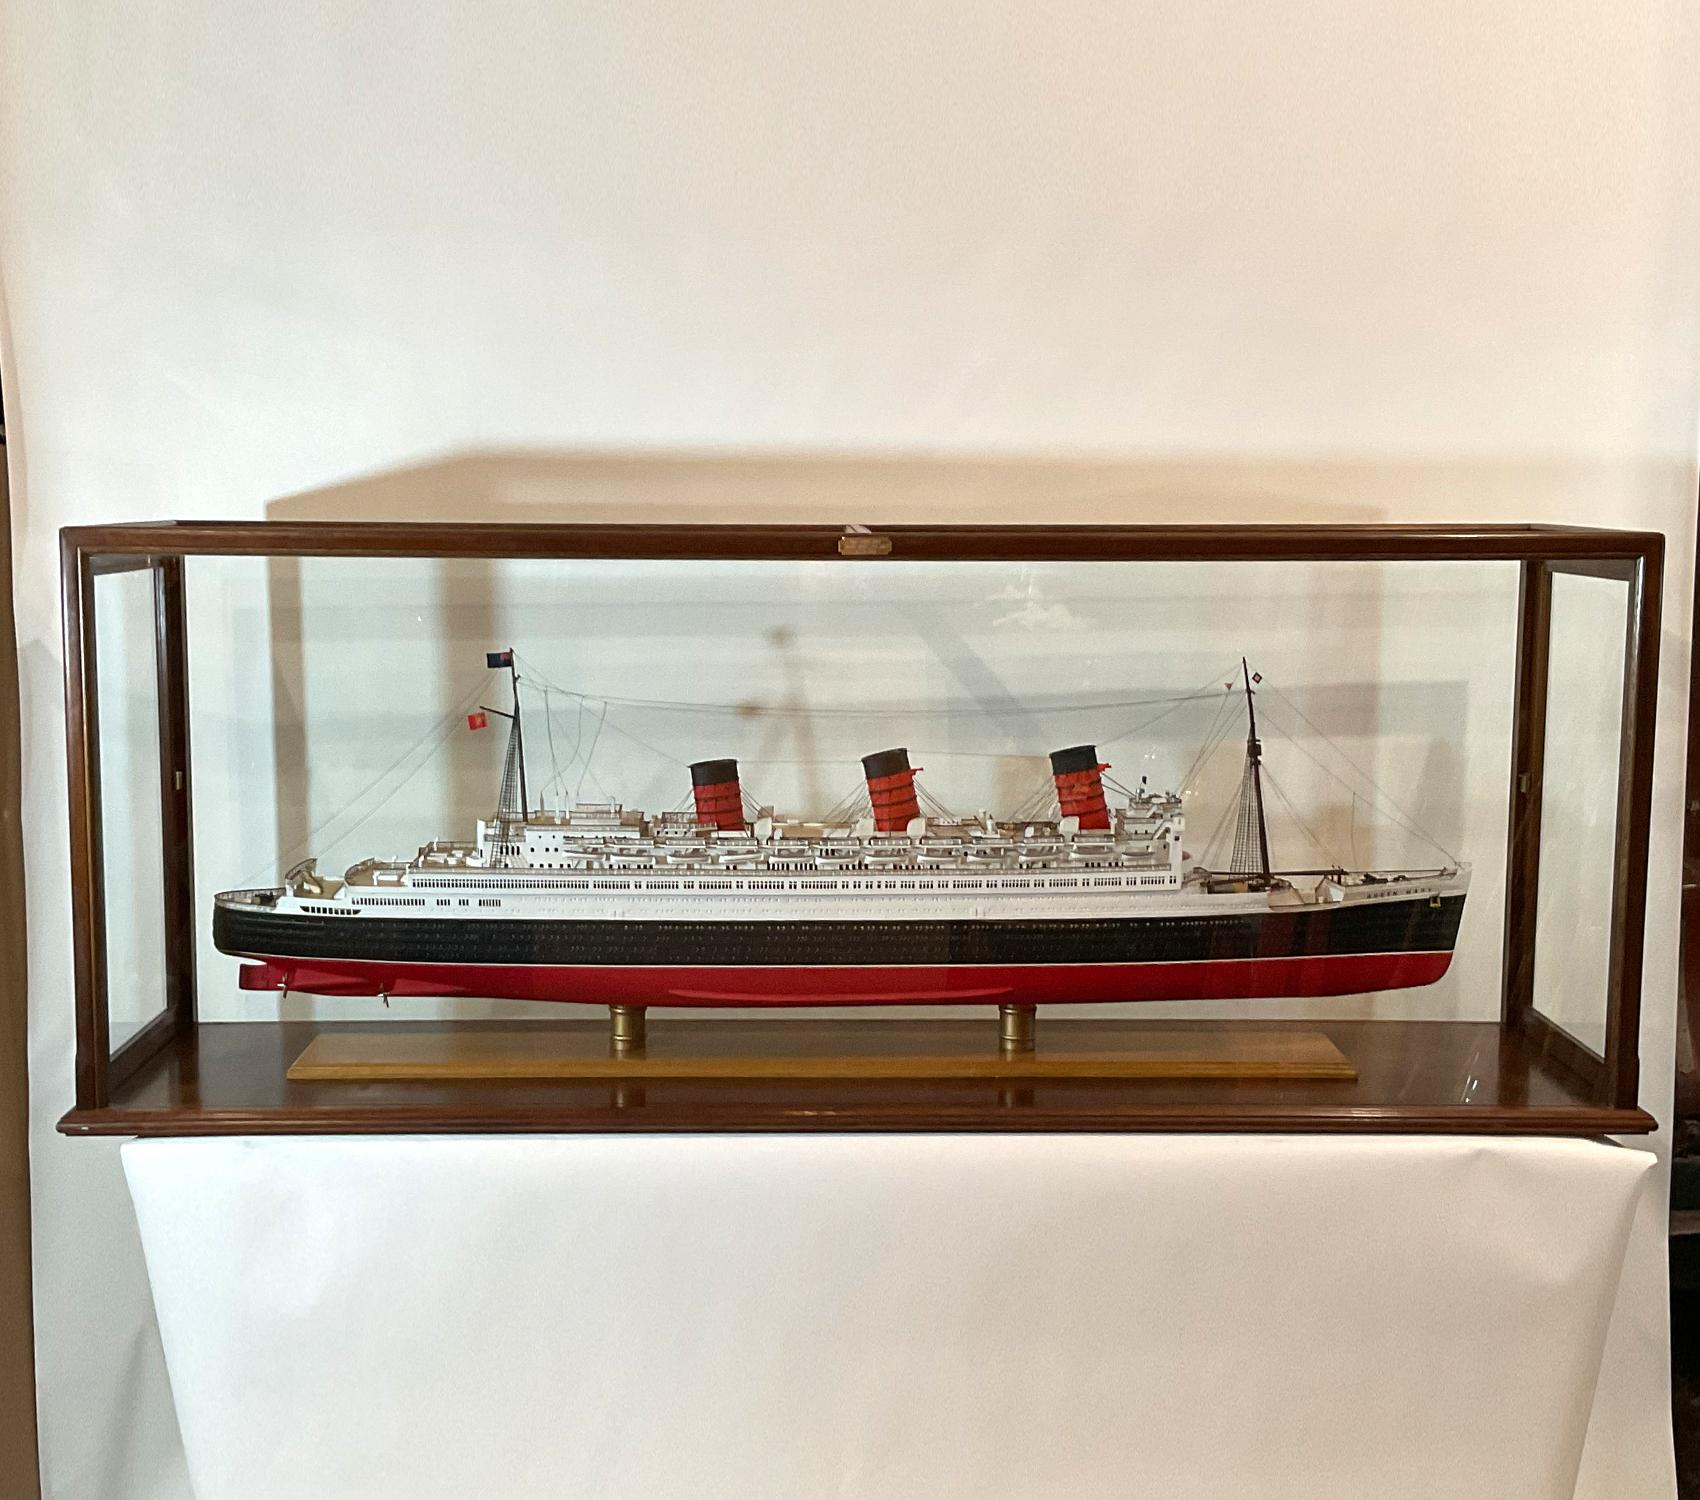 Cased model of the Cunard Lines Ocean Liner “Queen Mary”. Six-foot model of this classic. Highly detailed with planked deck, cabins, skylights, lifeboats, steam funnels, ventilator funnels, etc. Fitted to a custom mahogany case.

Weight: 170